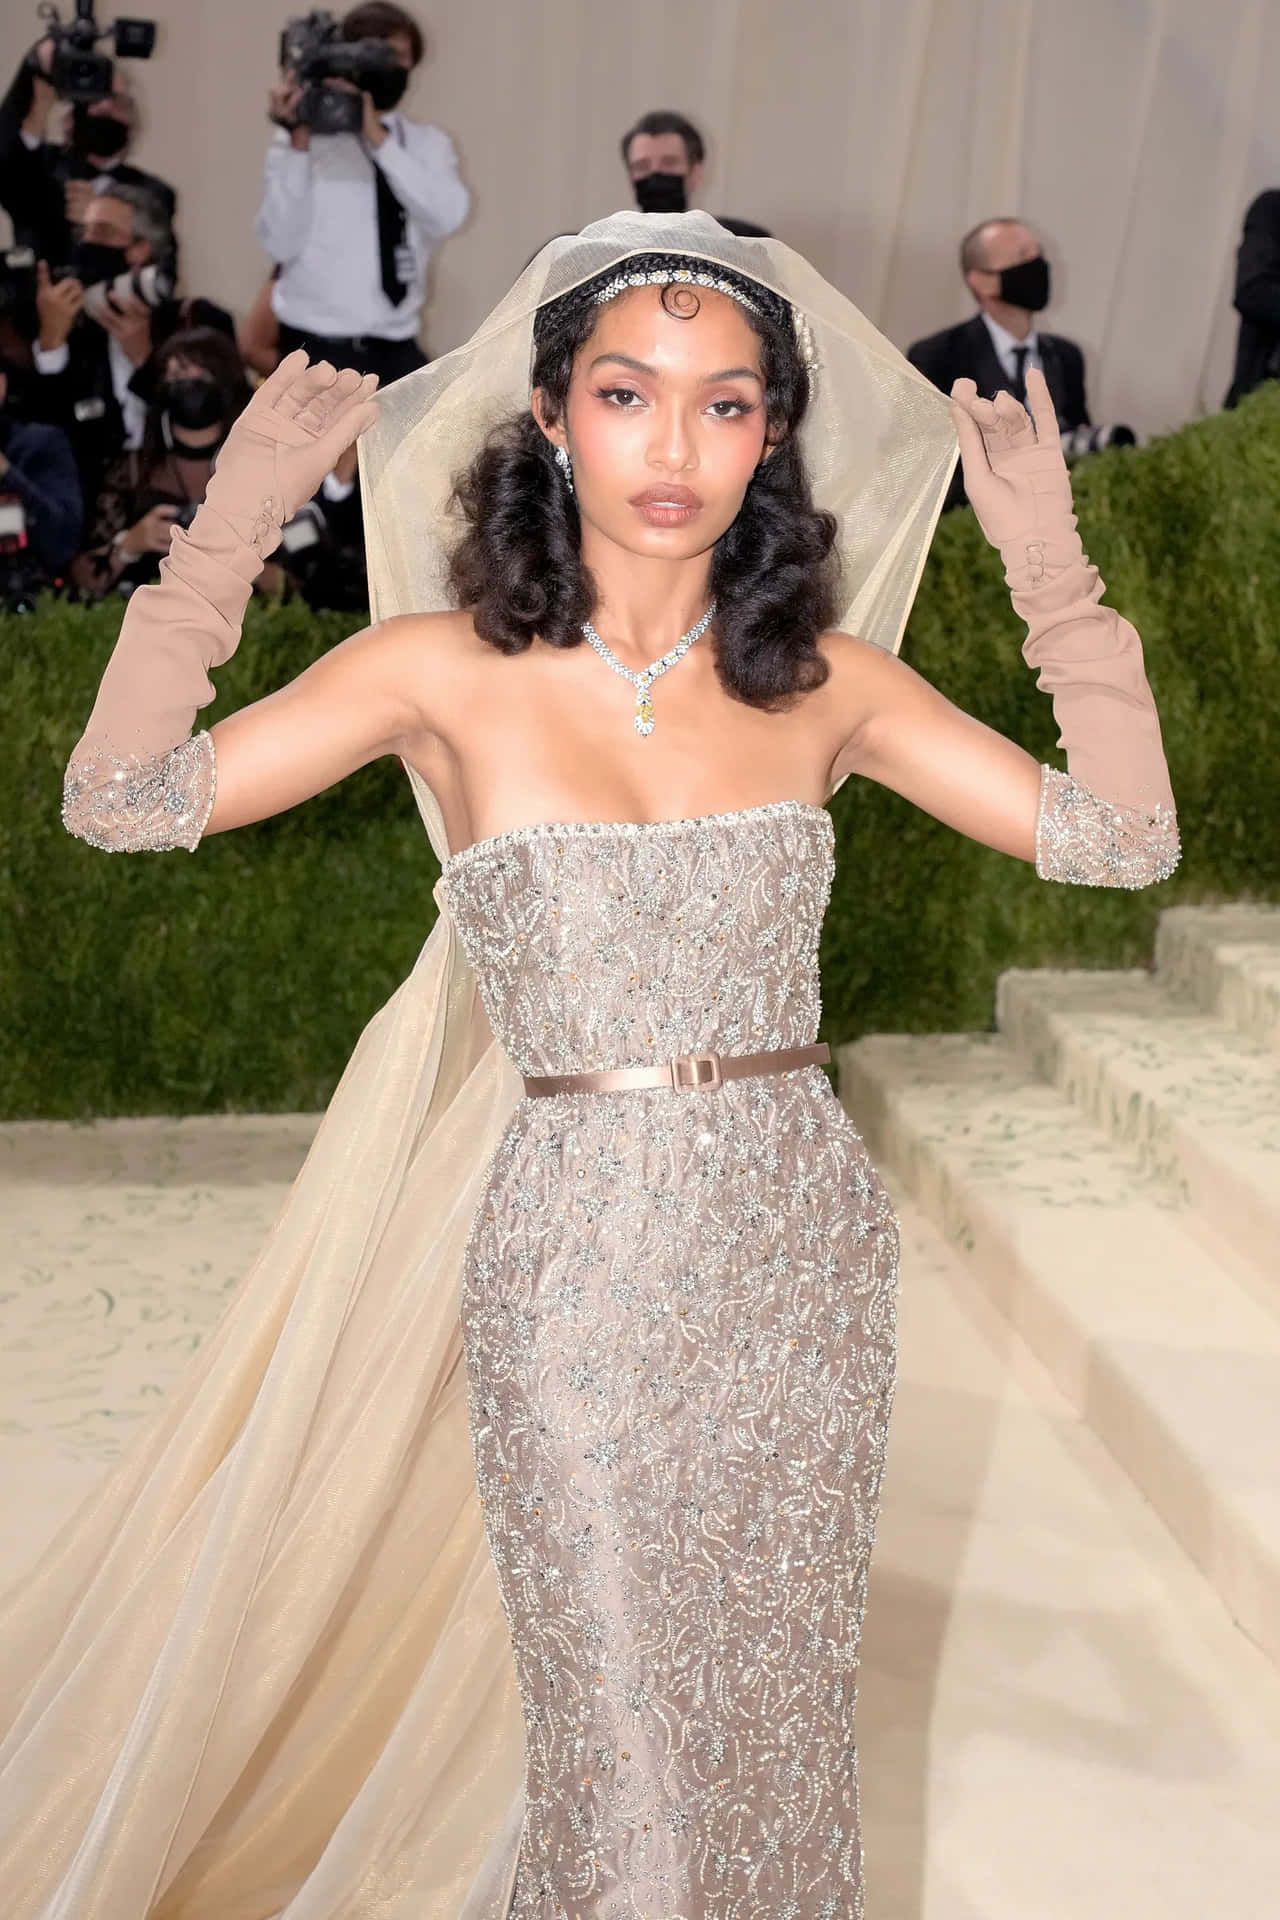 Celebrities Show Off Their Thriving Fashion Sense at the 2021 Met Gala